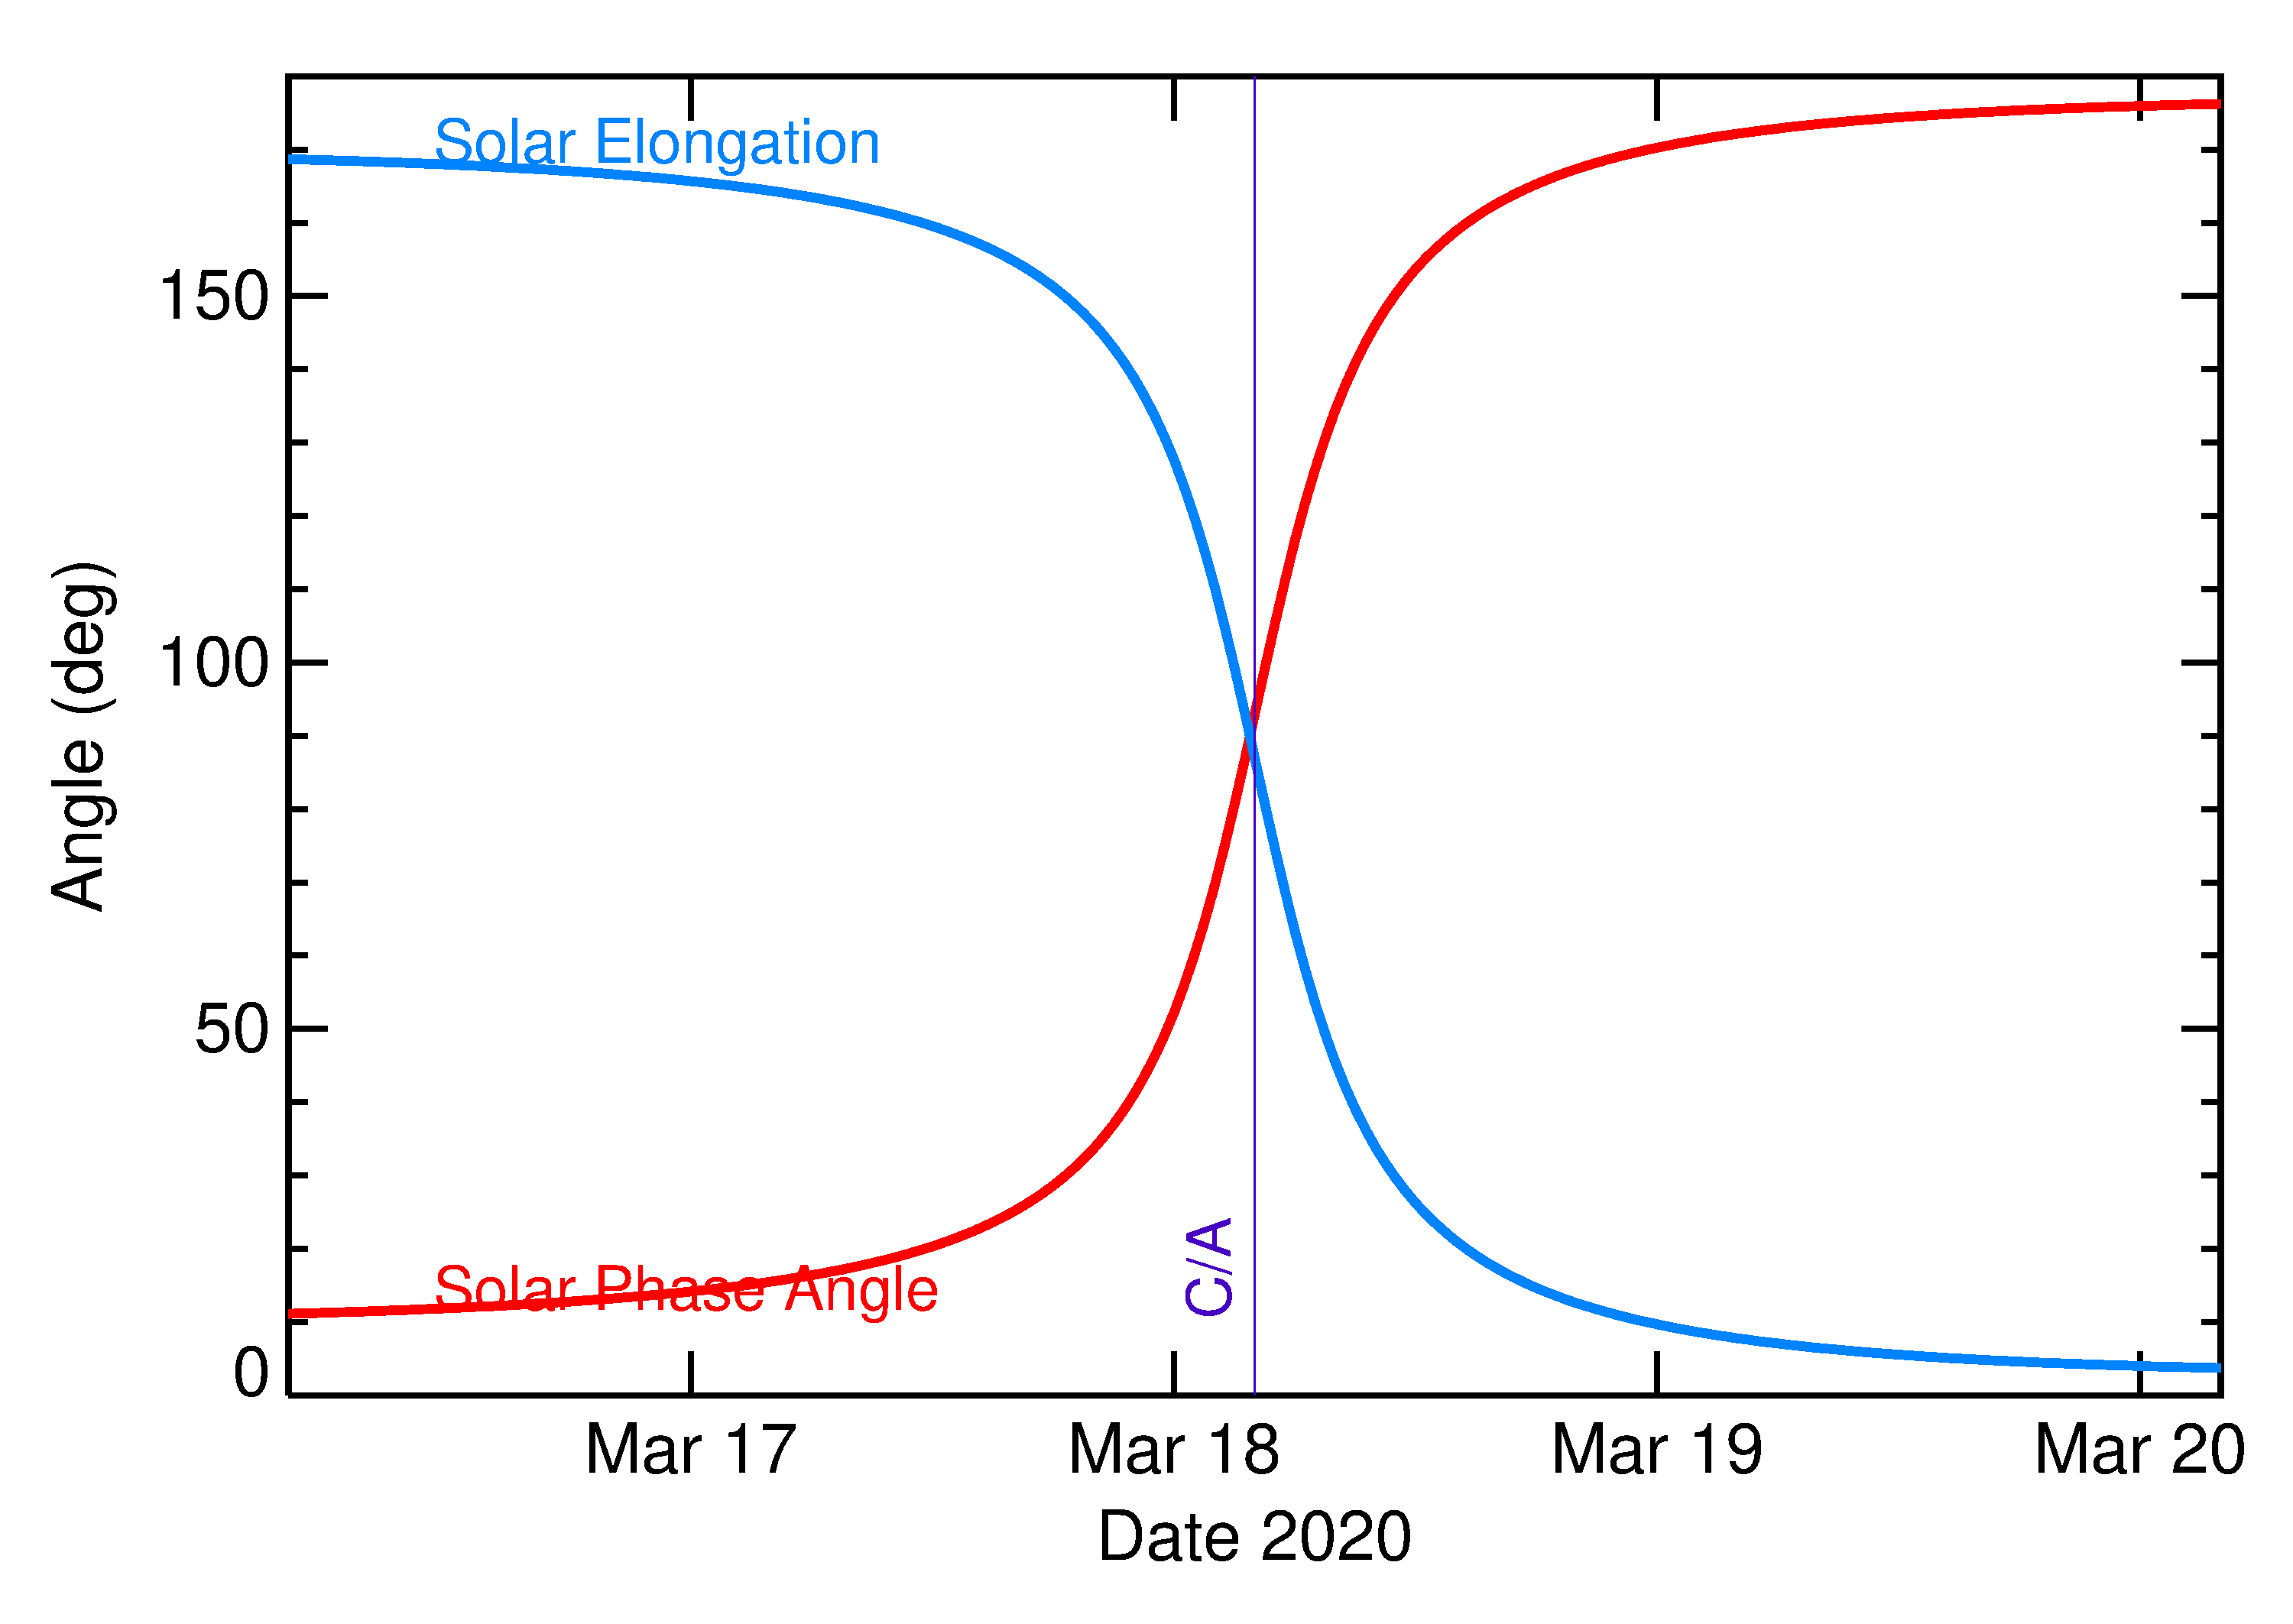 Solar Elongation and Solar Phase Angle of 2020 FD in the days around closest approach